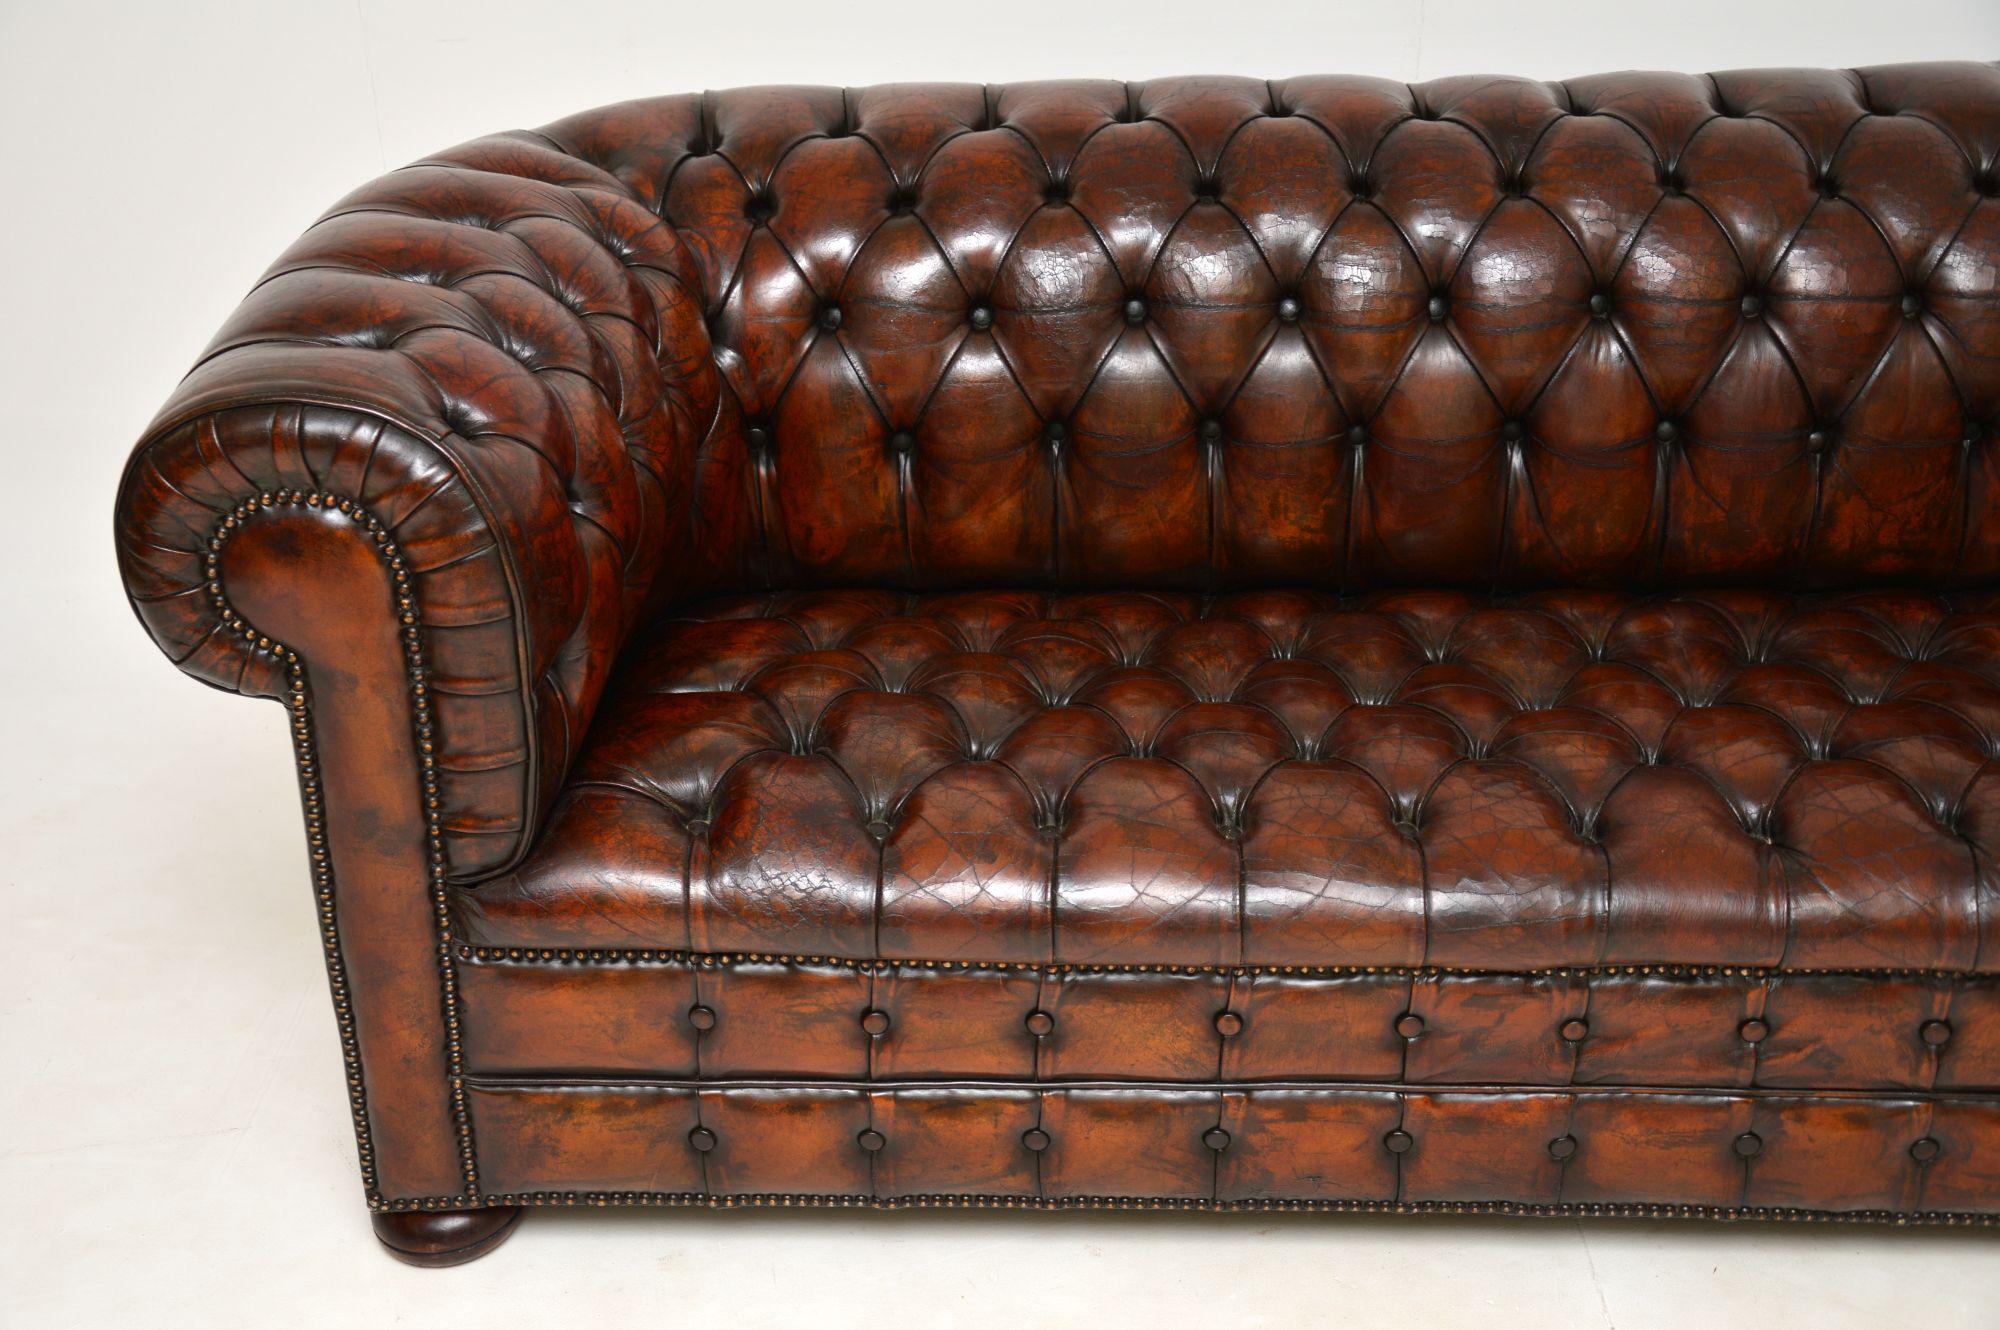 Antique Deep Buttoned Leather Chesterfield Sofa 1